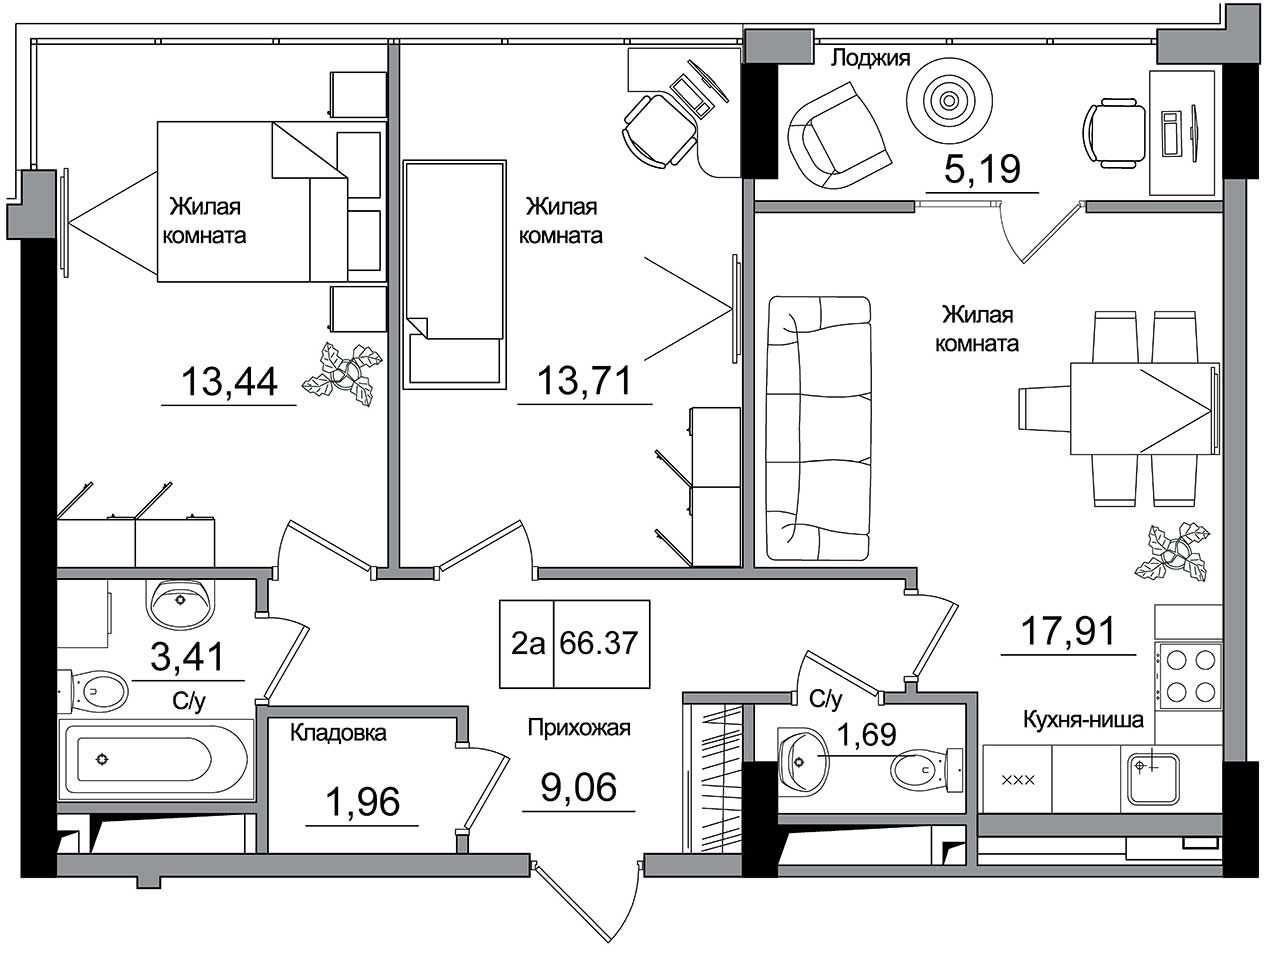 Planning 2-rm flats area 66.37m2, AB-16-09/00006.